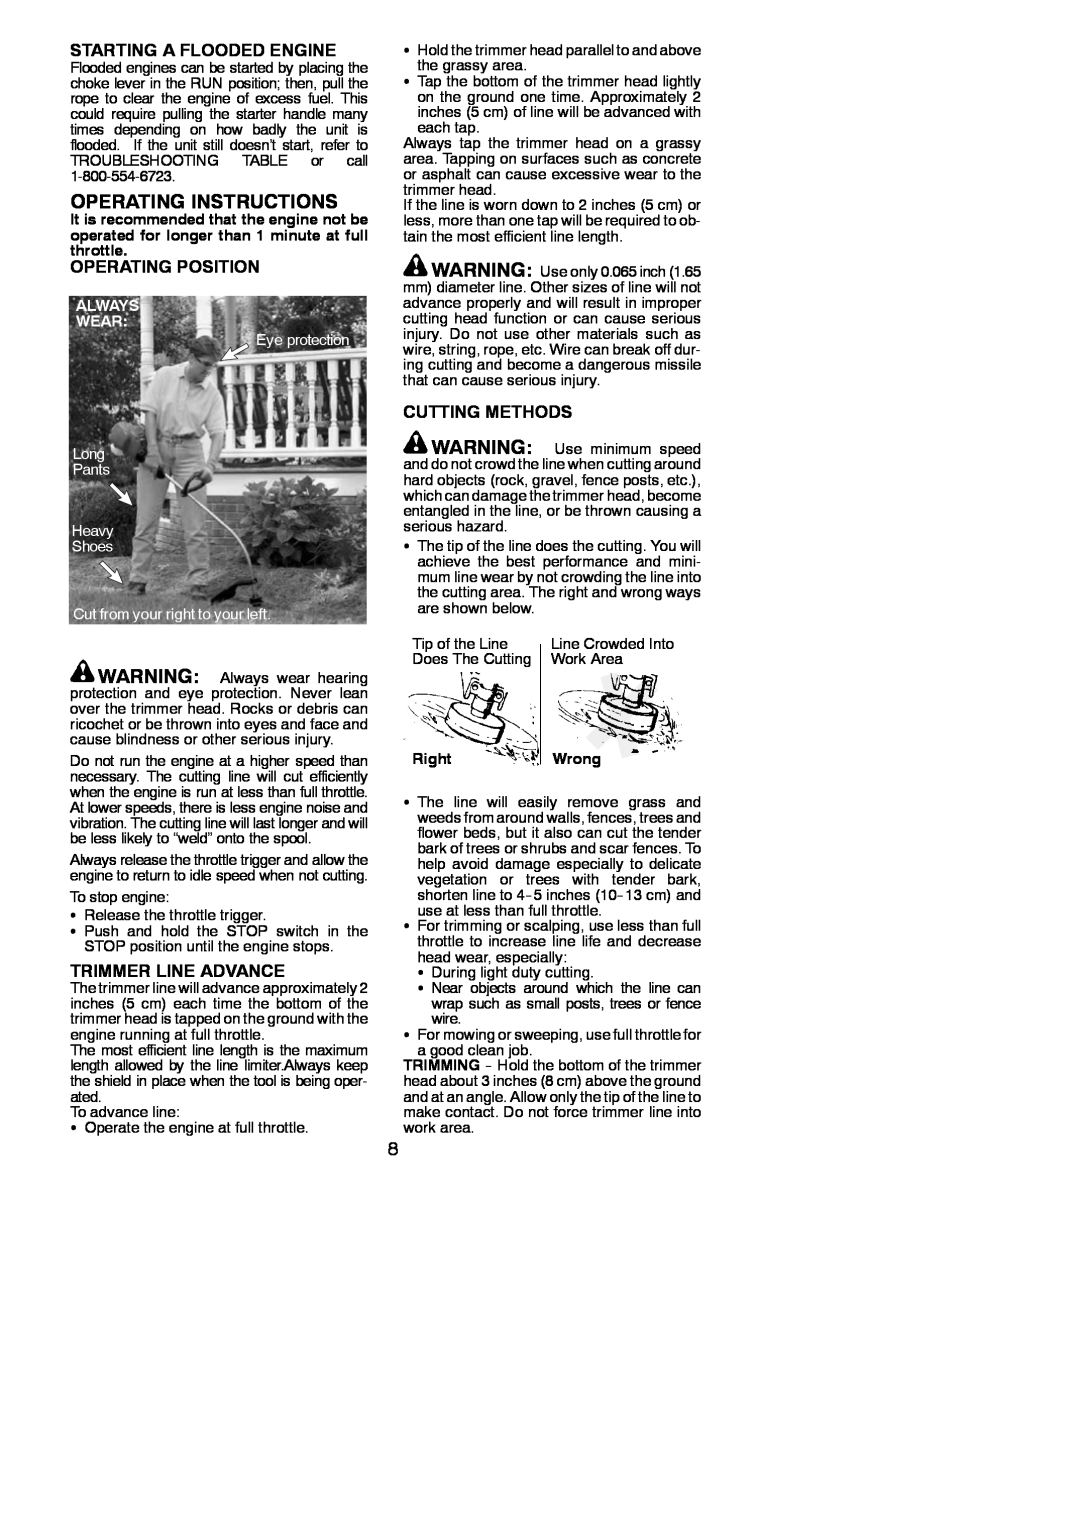 Weed Eater 952711938 Operating Instructions, Starting A Flooded Engine, Operating Position, Trimmer Line Advance 